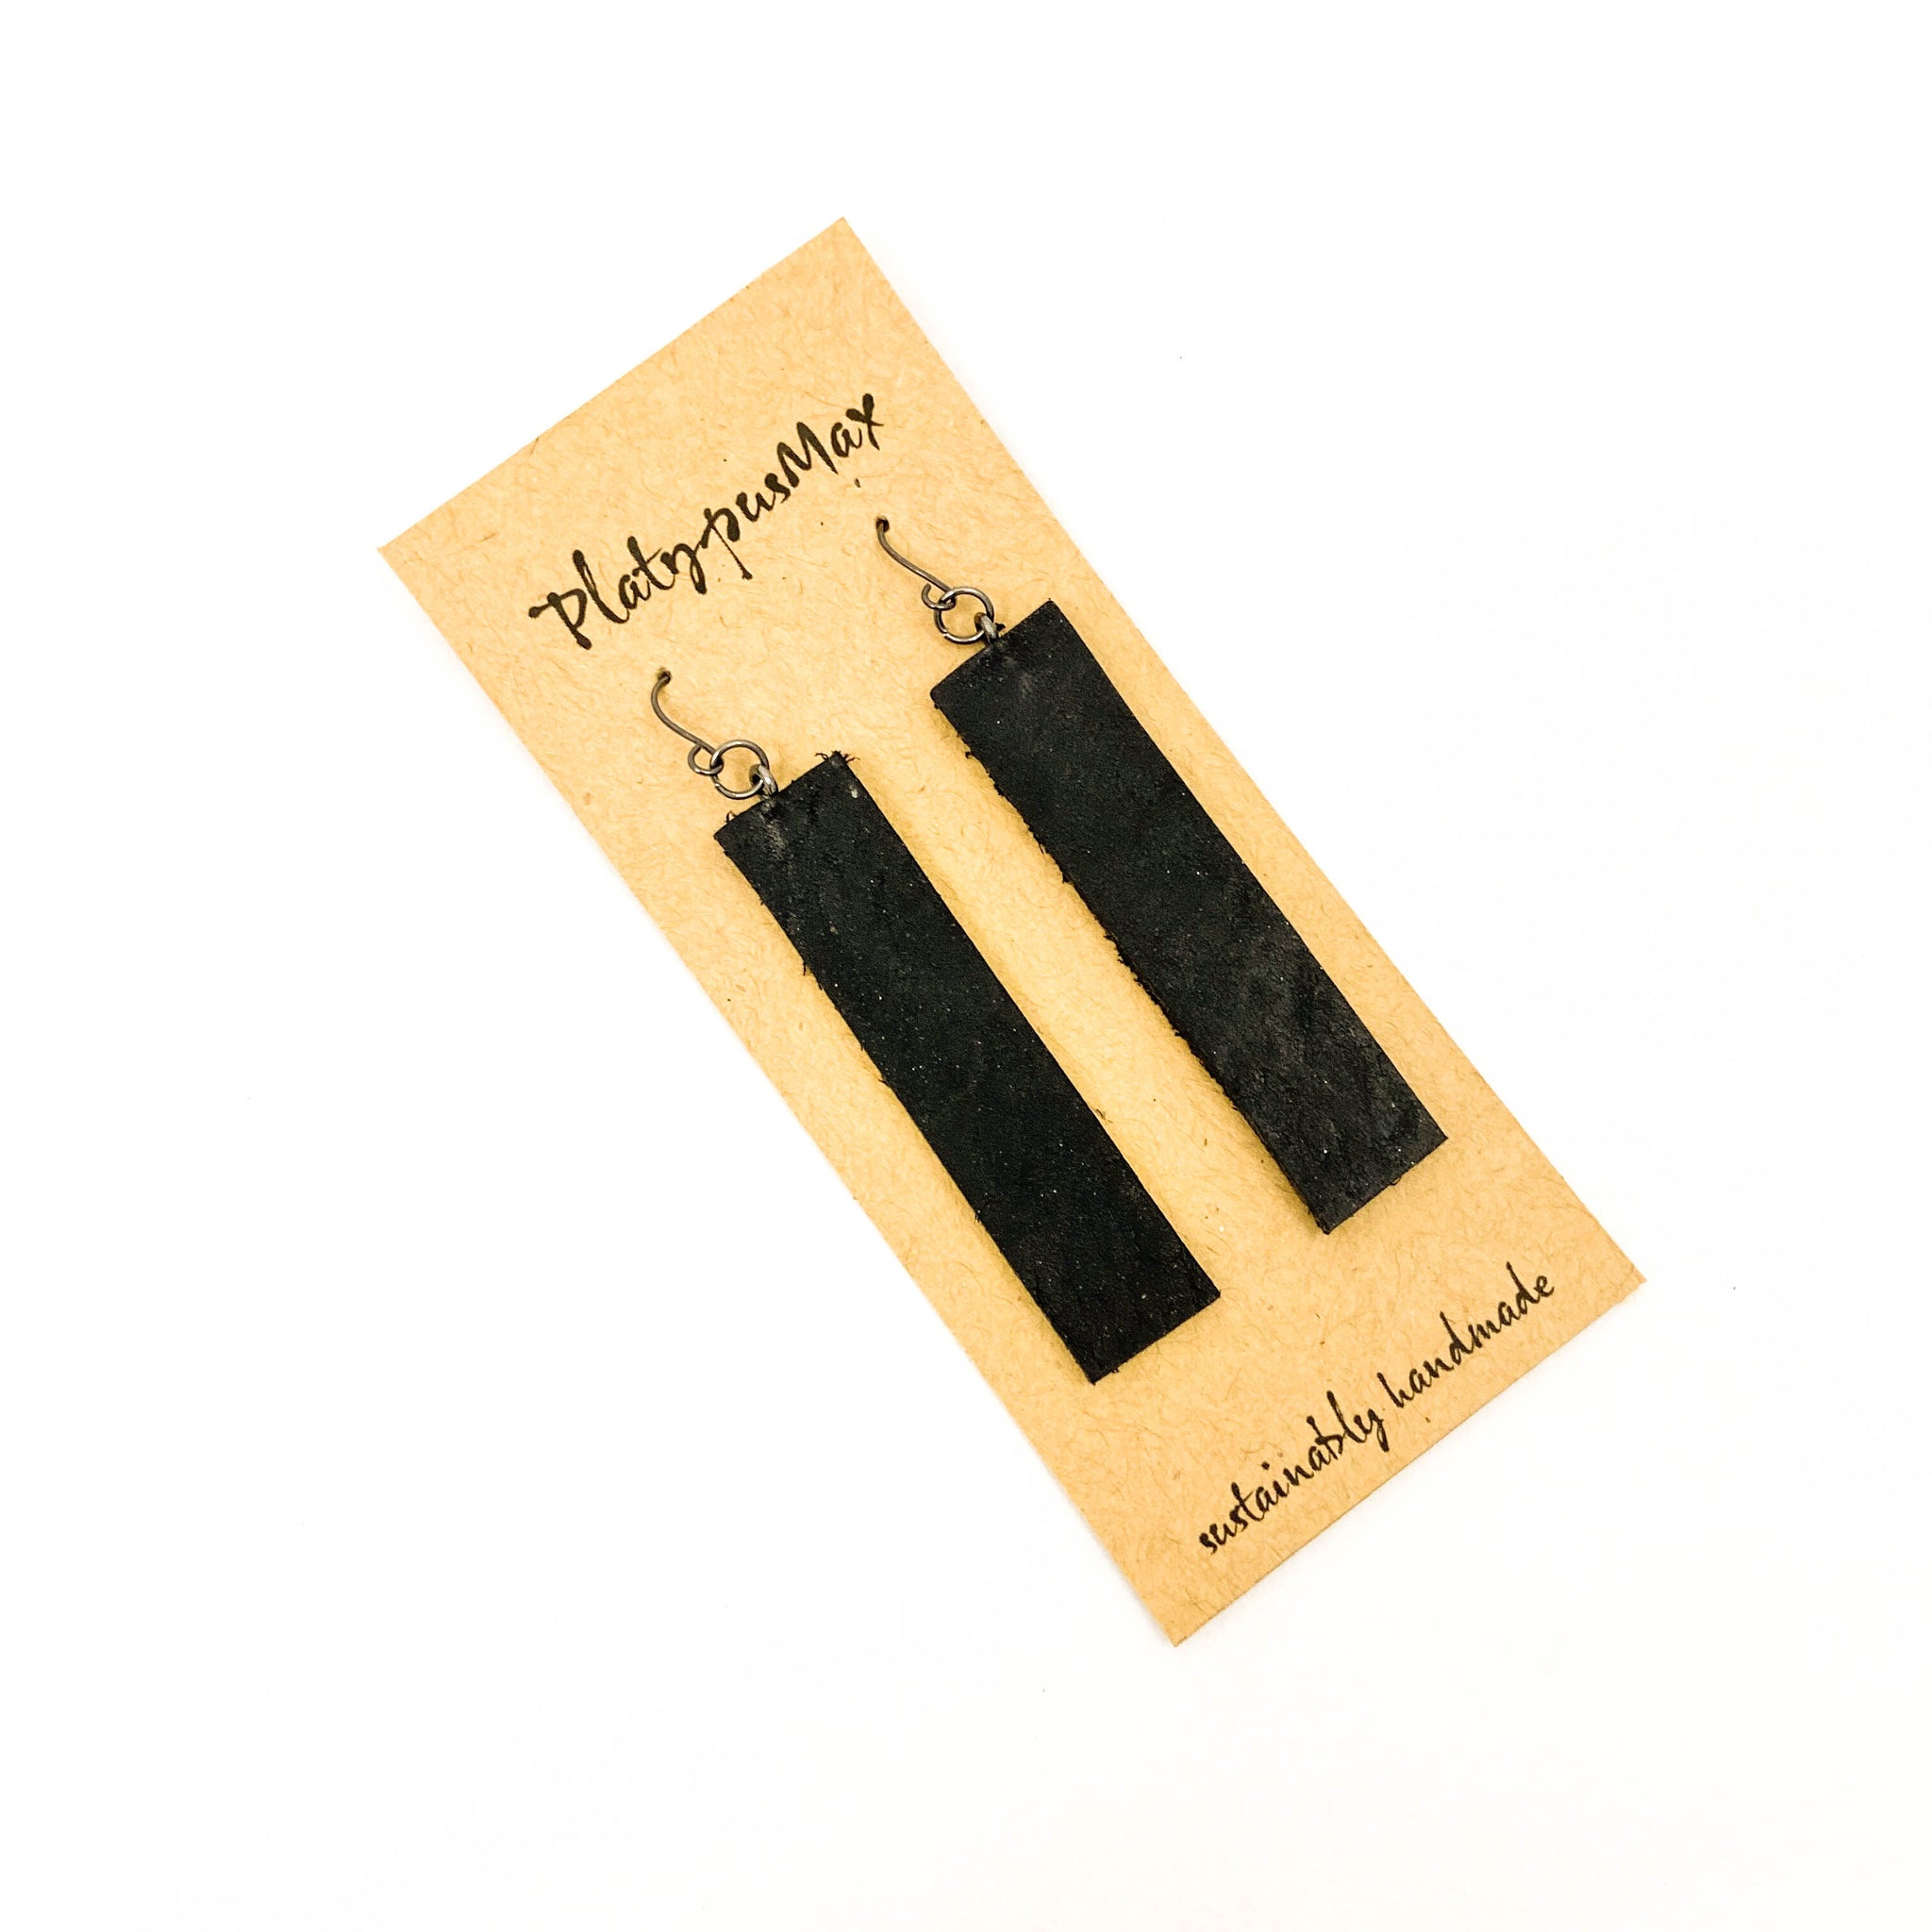 Basic Black All-Natural Leather Bar Dangle Earrings - Platypus Max